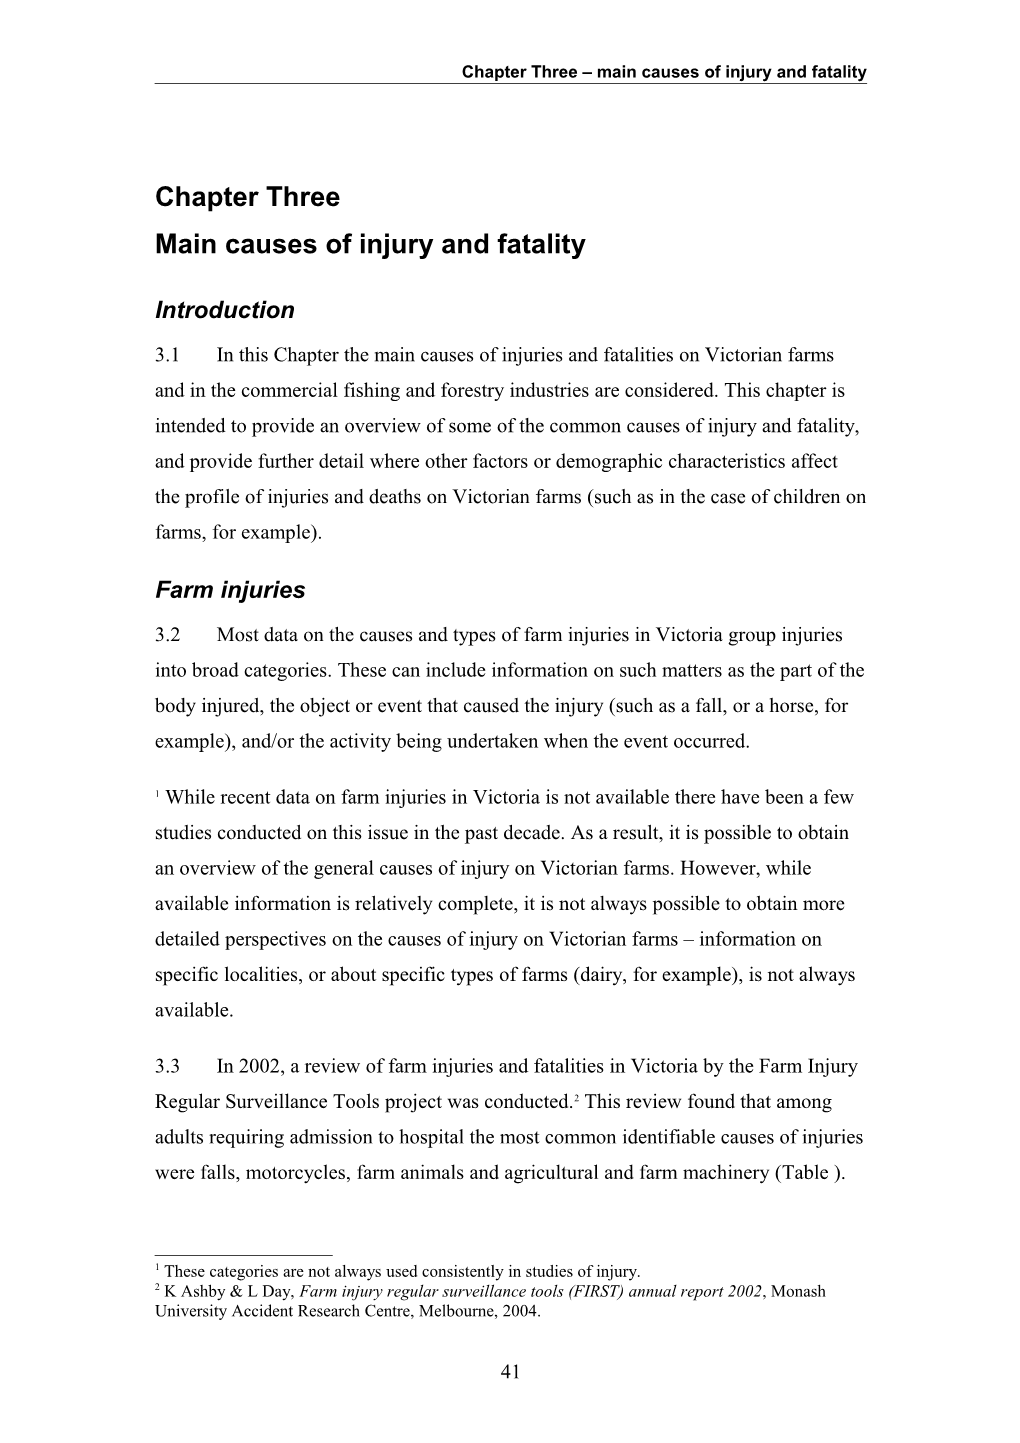 Chapter Three Main Causes of Injury and Fatality